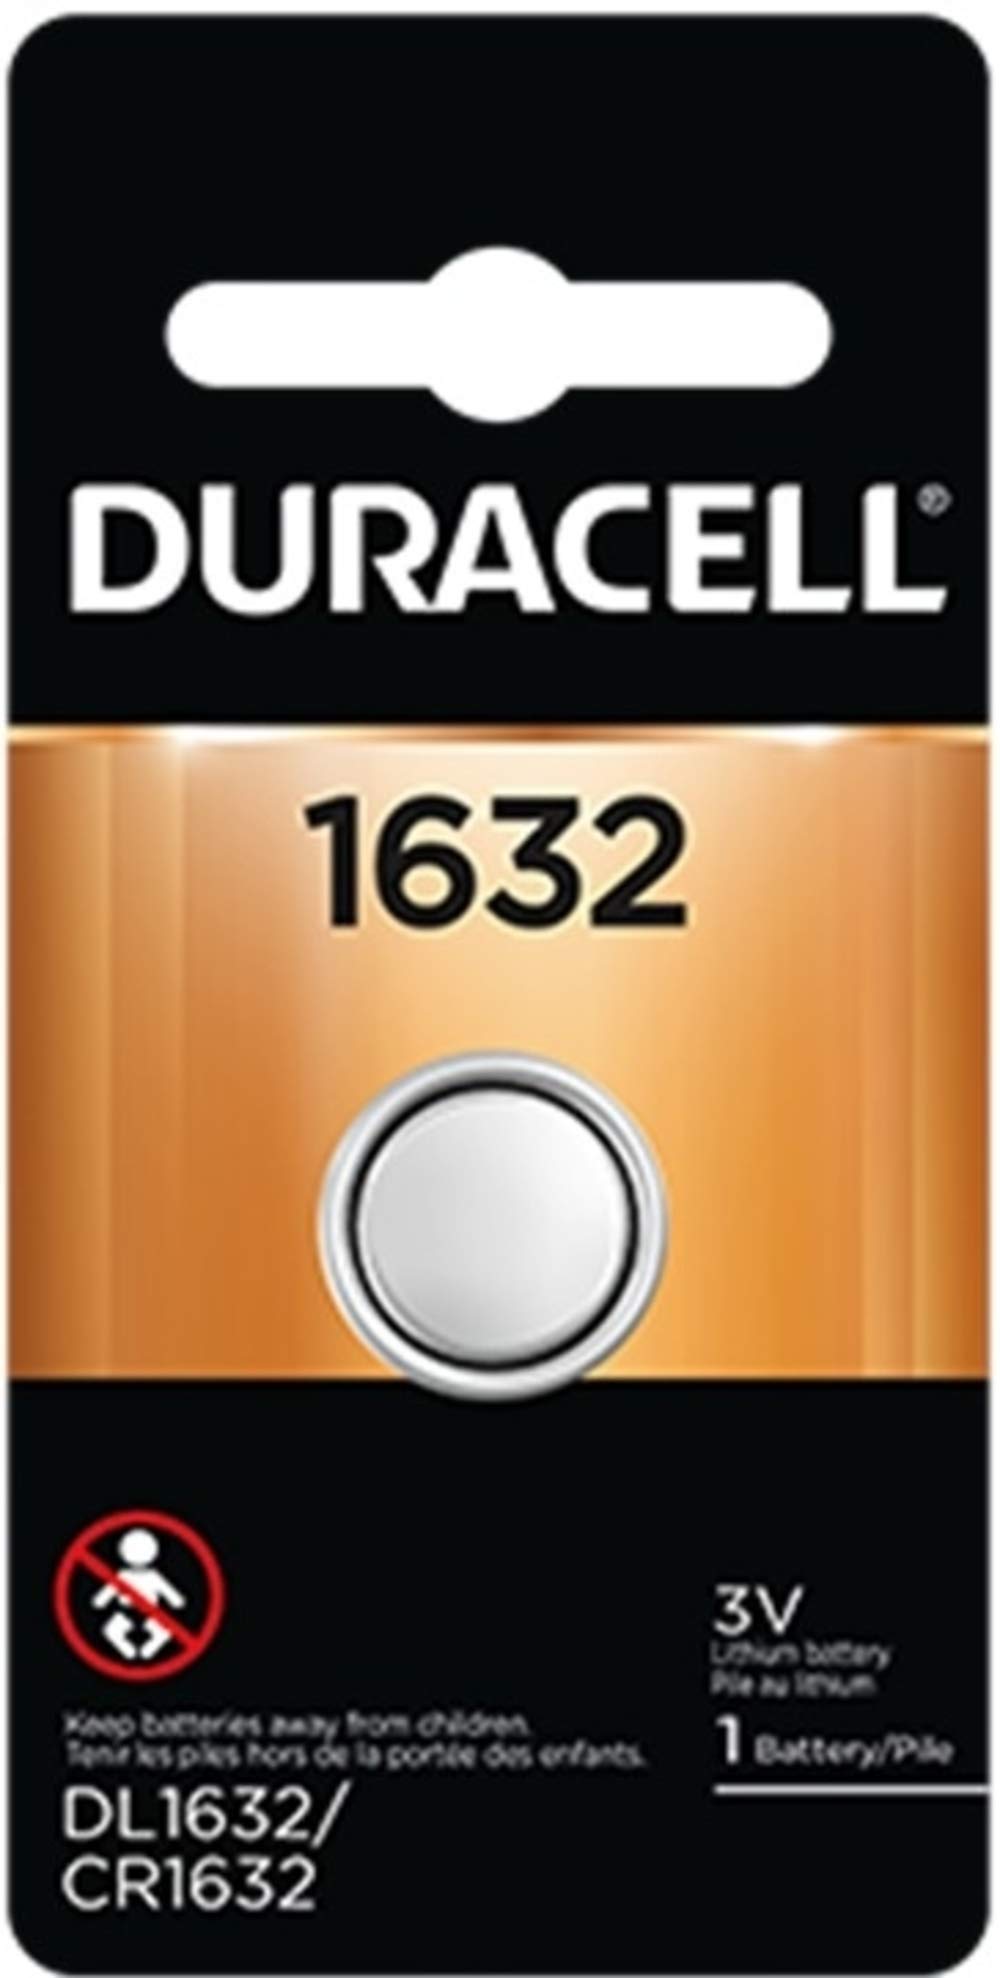 DURACELL BATTERY FINDER